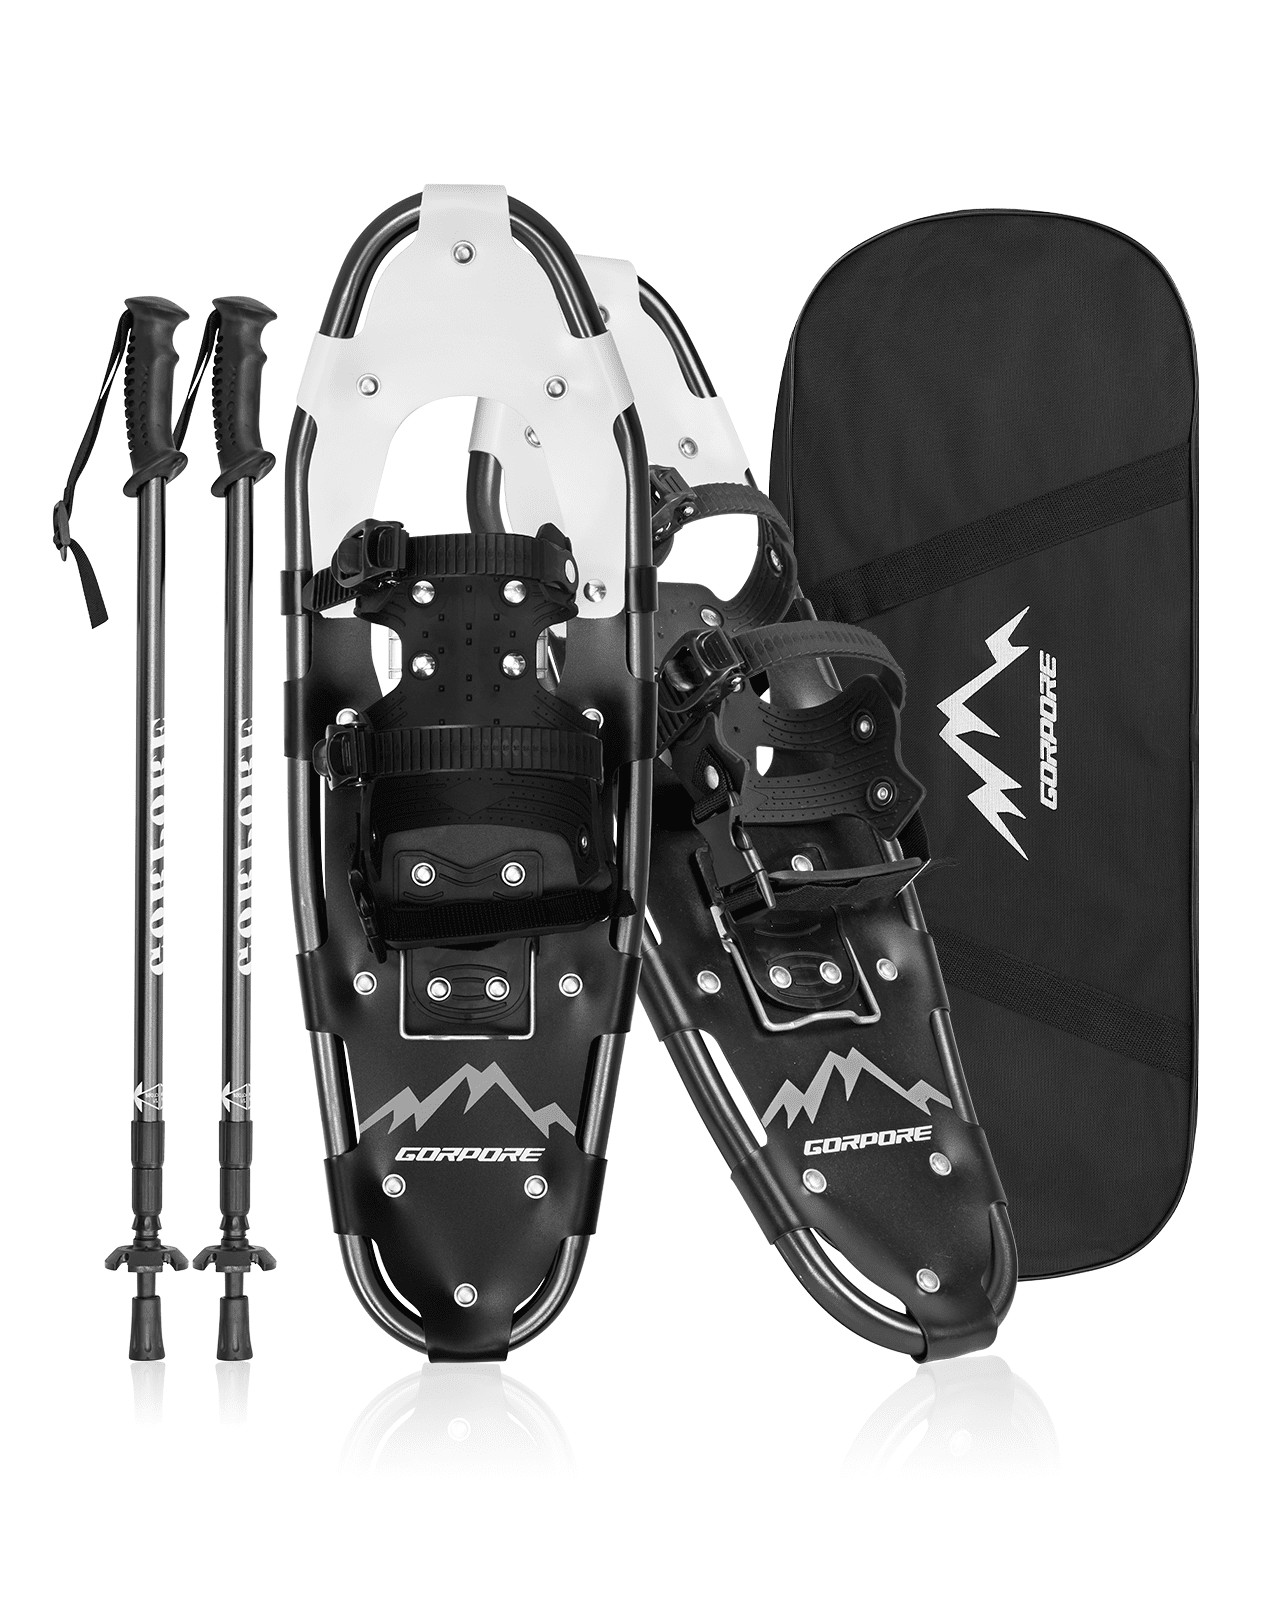 NEW GV Snowshoes Ratchet Technology Snowshoe Bindings FREE SHIPPING 